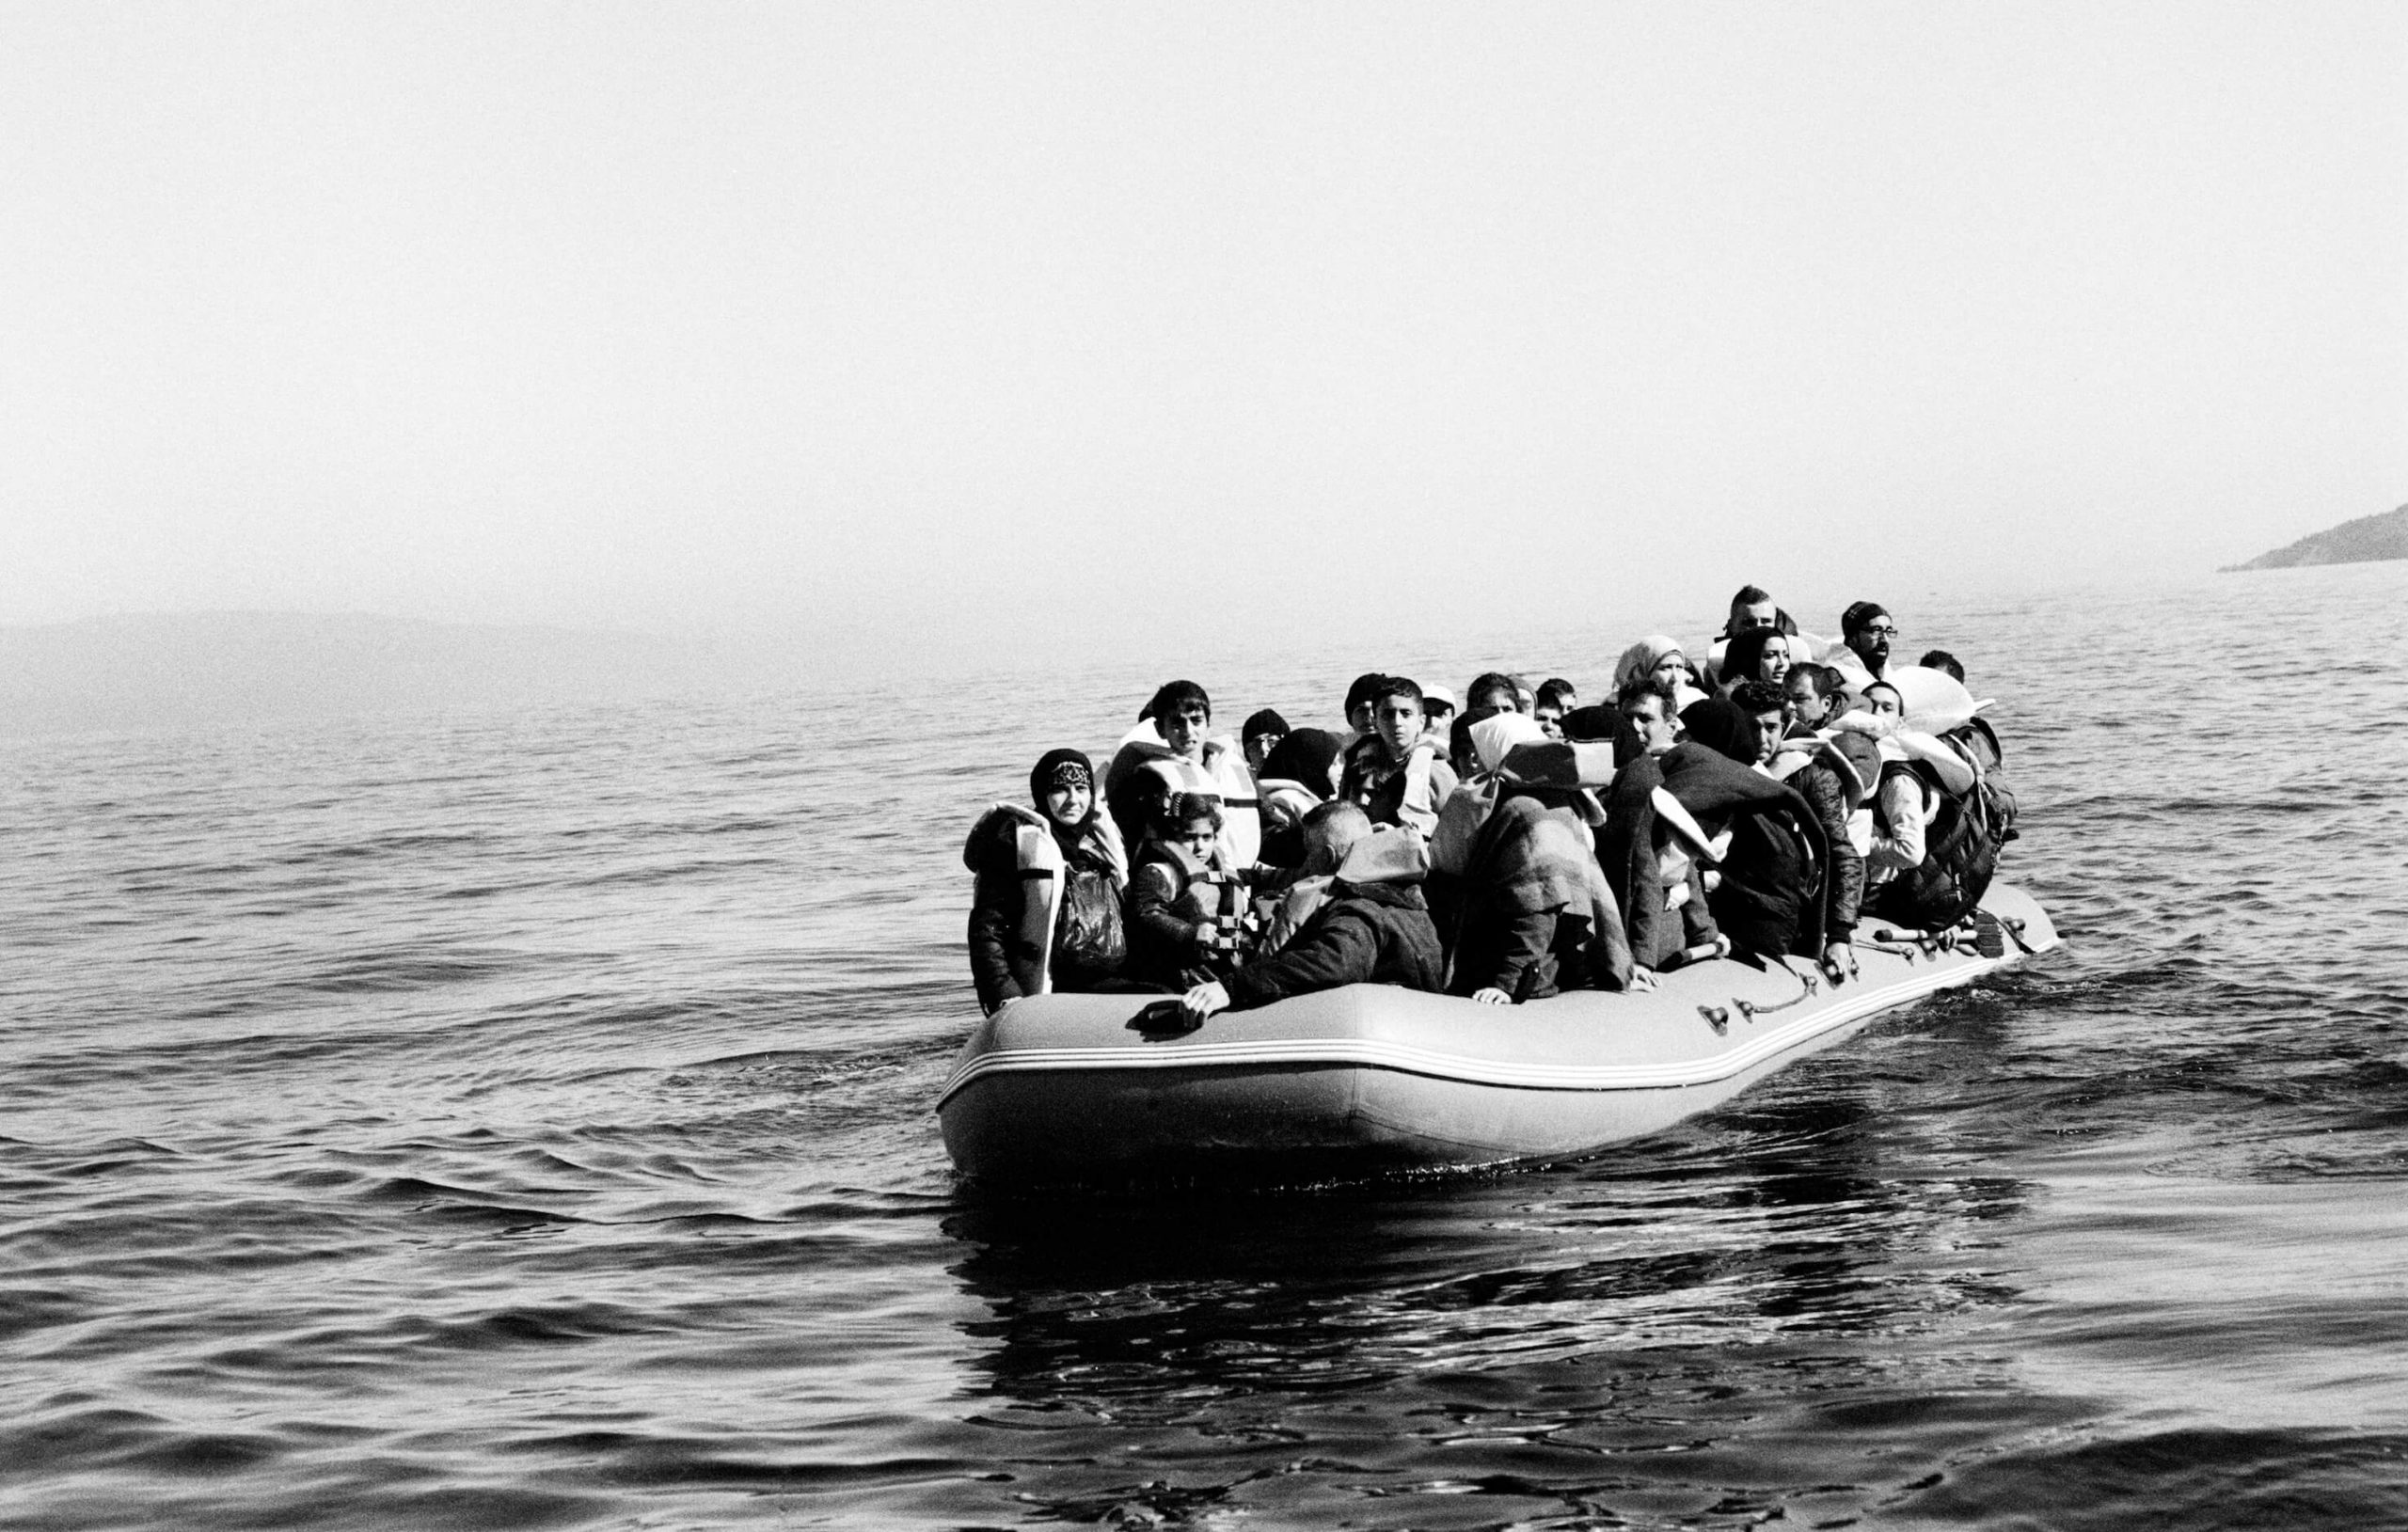 A boat carrying Syrian refugees drifts in the Aegean